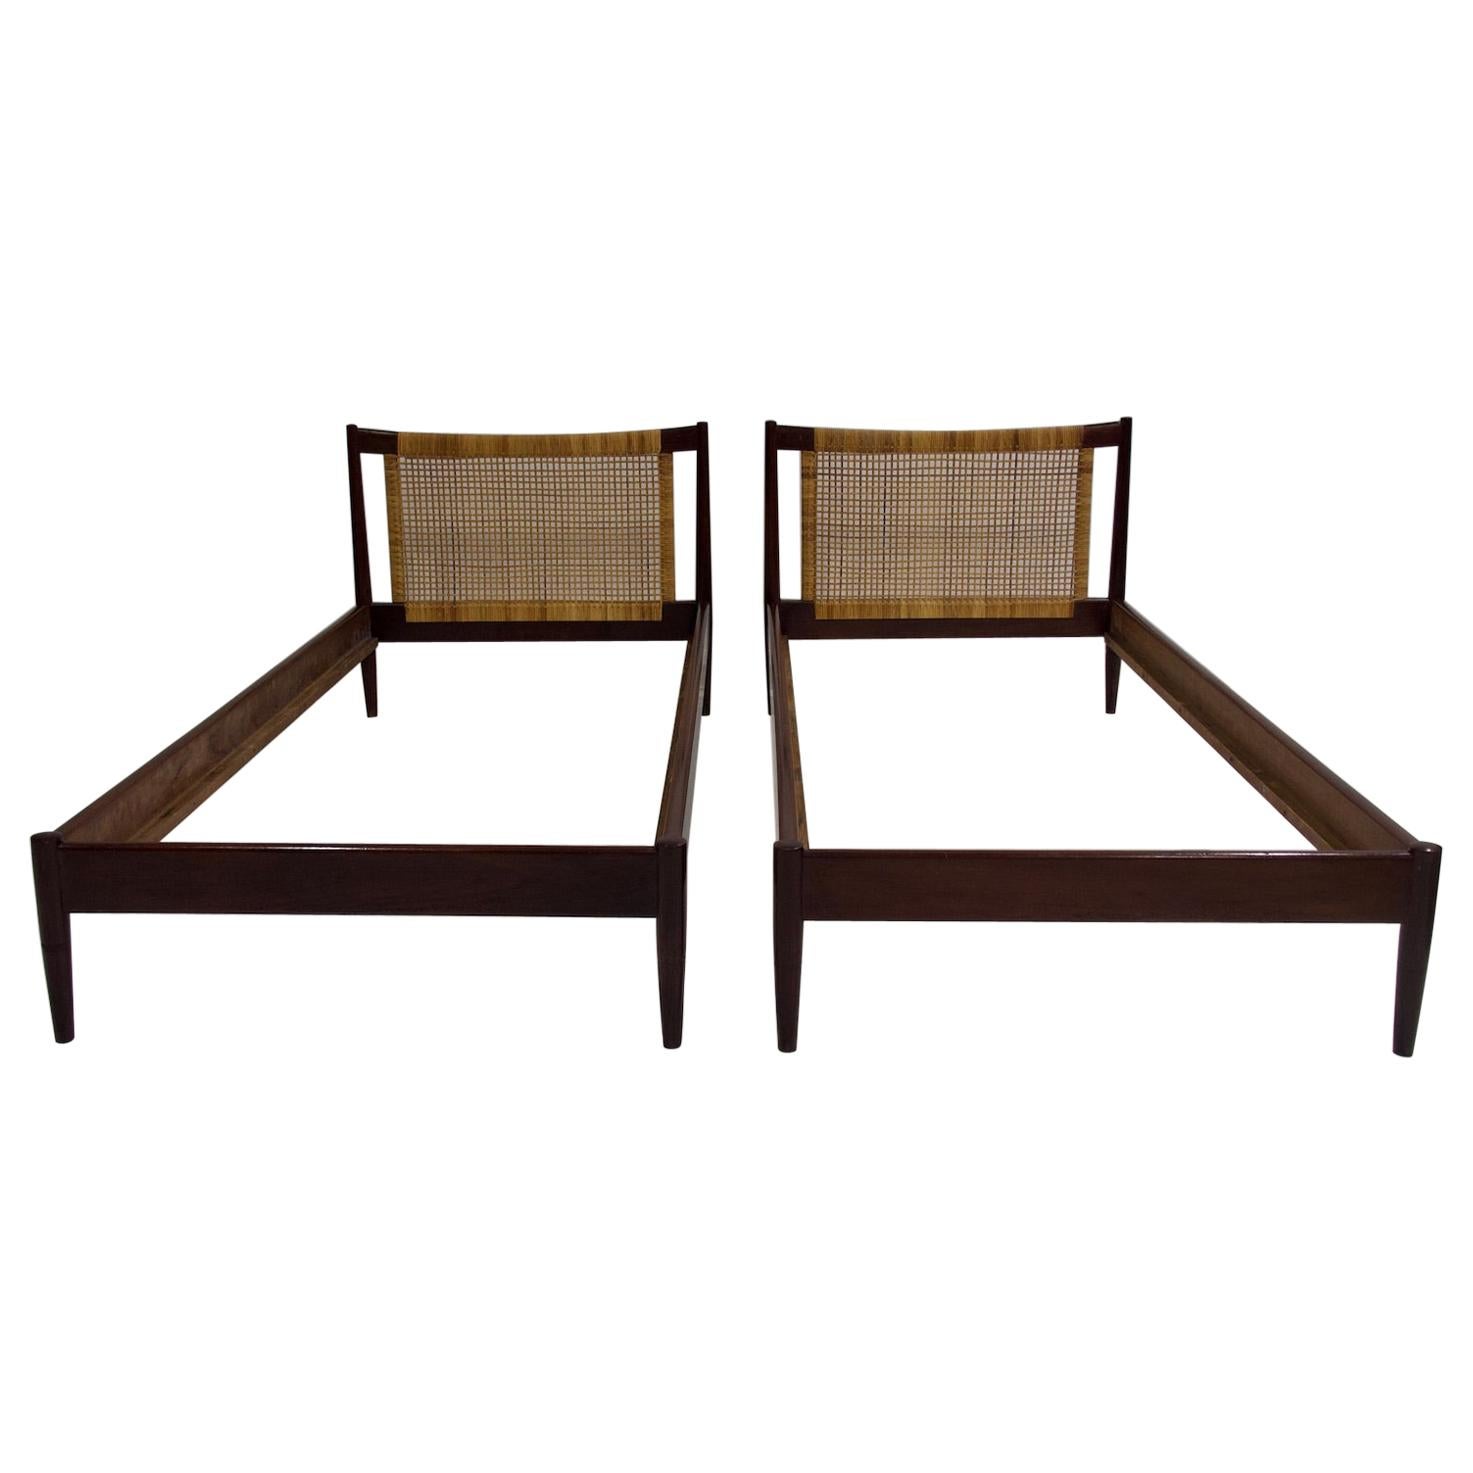 Pair of Wood and Wicker Bed Frames by Børge Mogensen